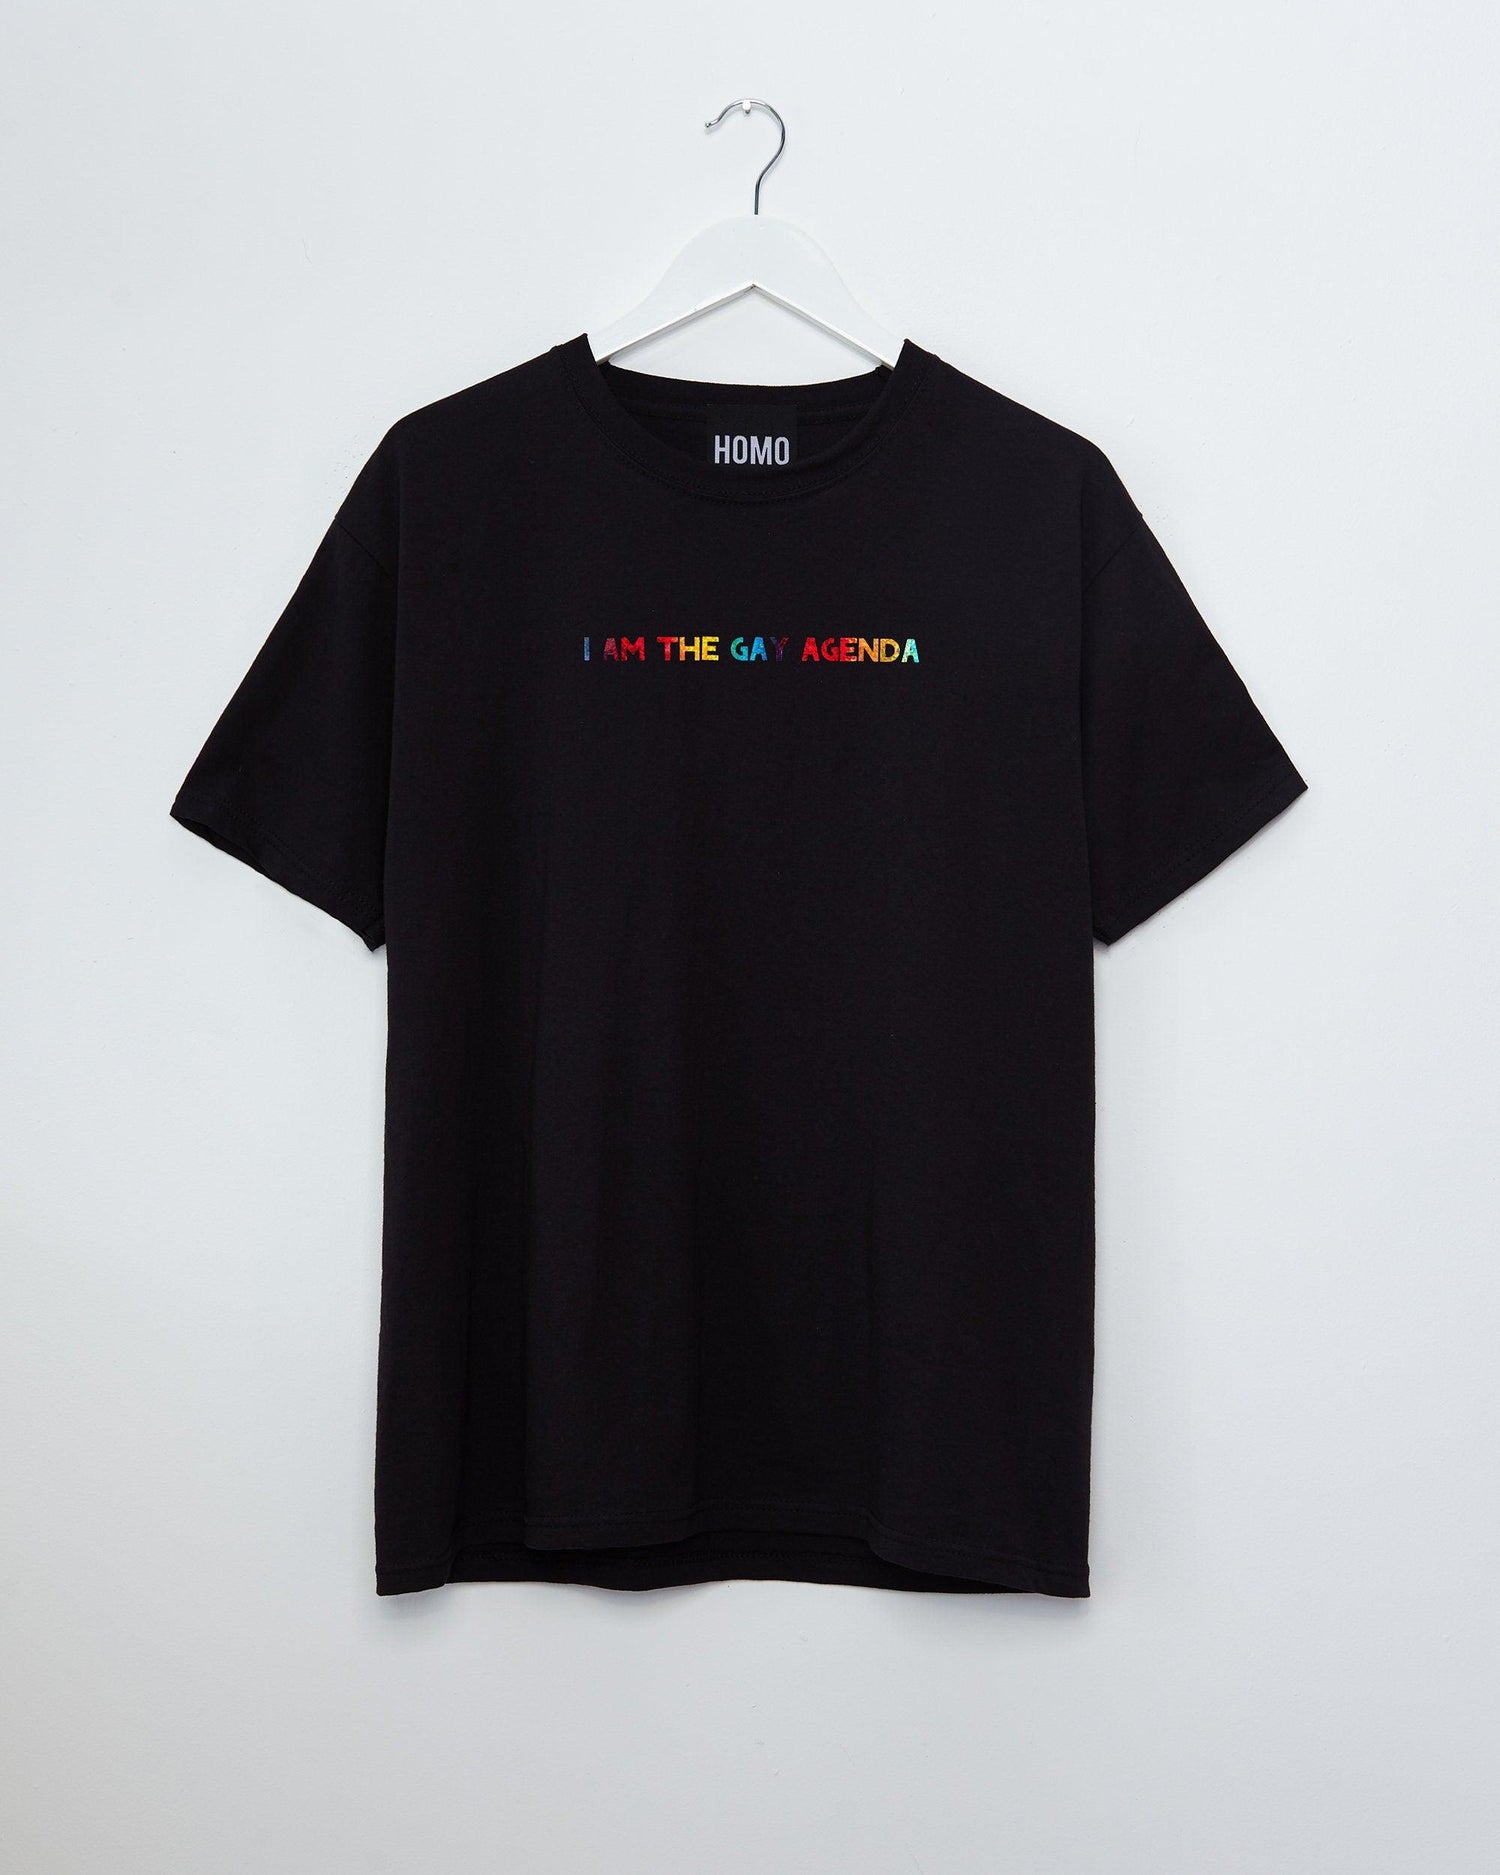 Sparkle in Pride with the "I Am The Gay Agenda Tee - Sparkly Rainbow on Black" - HOMOLONDON